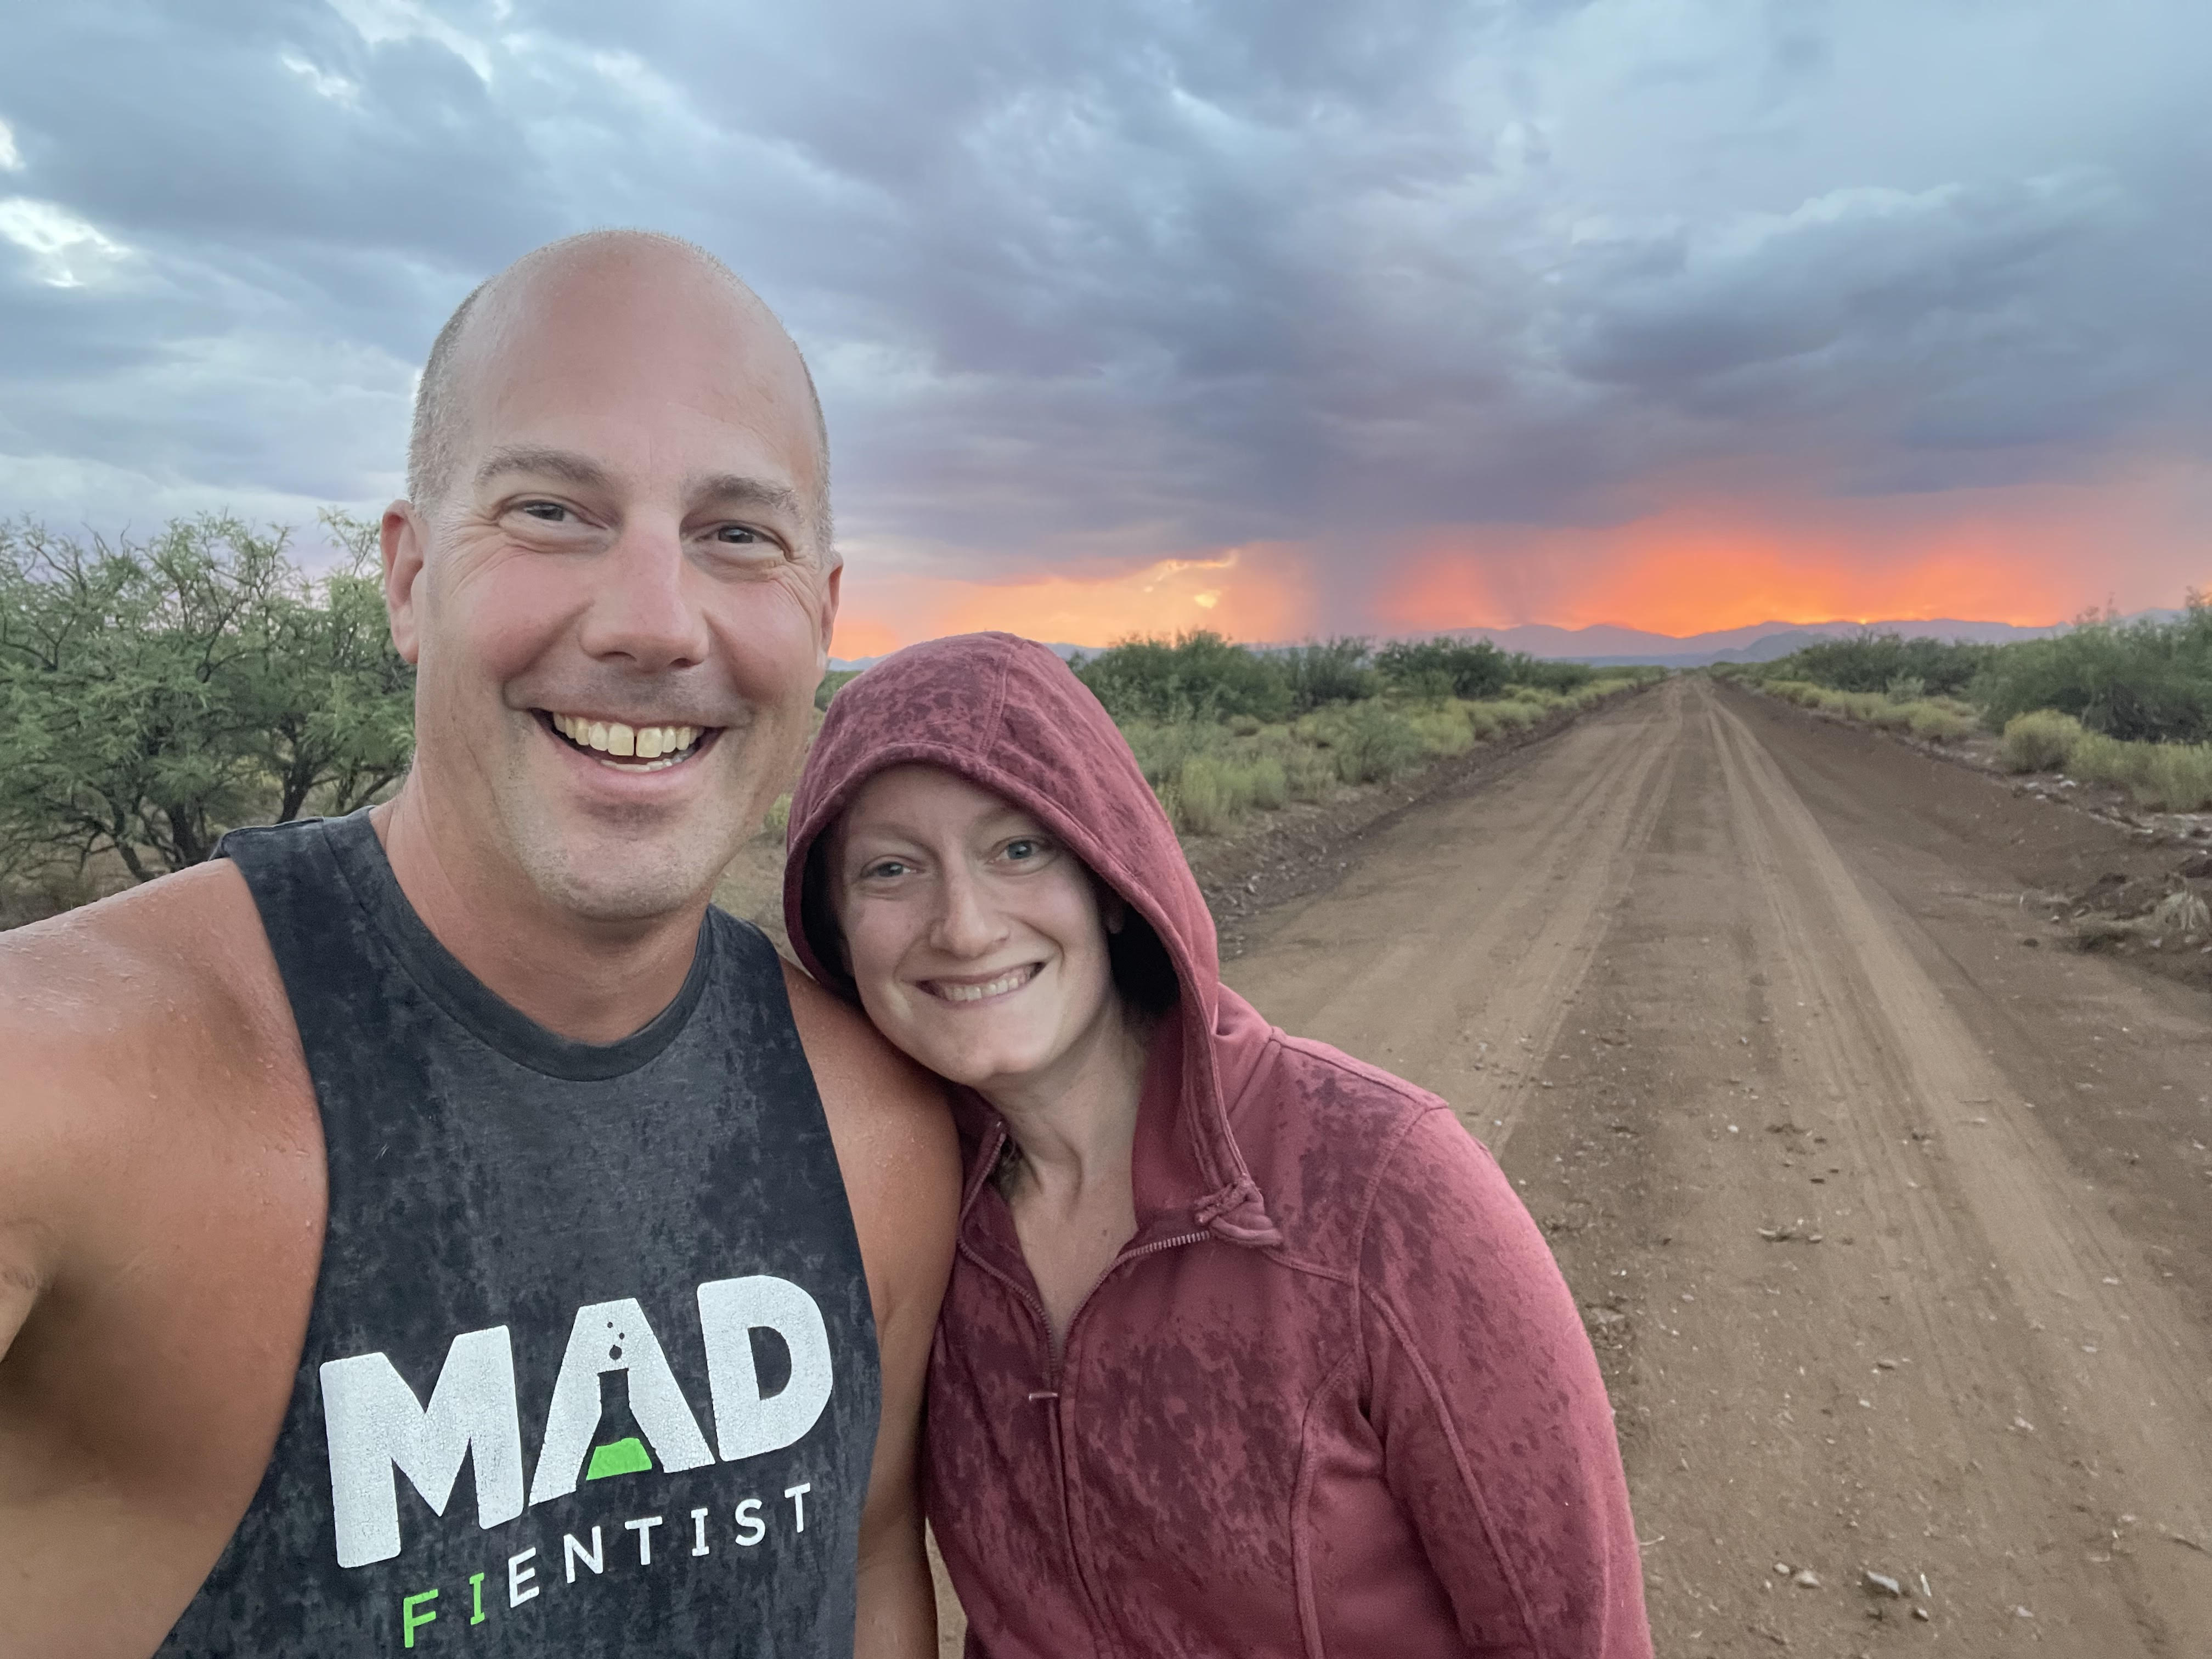 A man and his wife pose for a photo next to a dirt road with a orange sunset behind them.